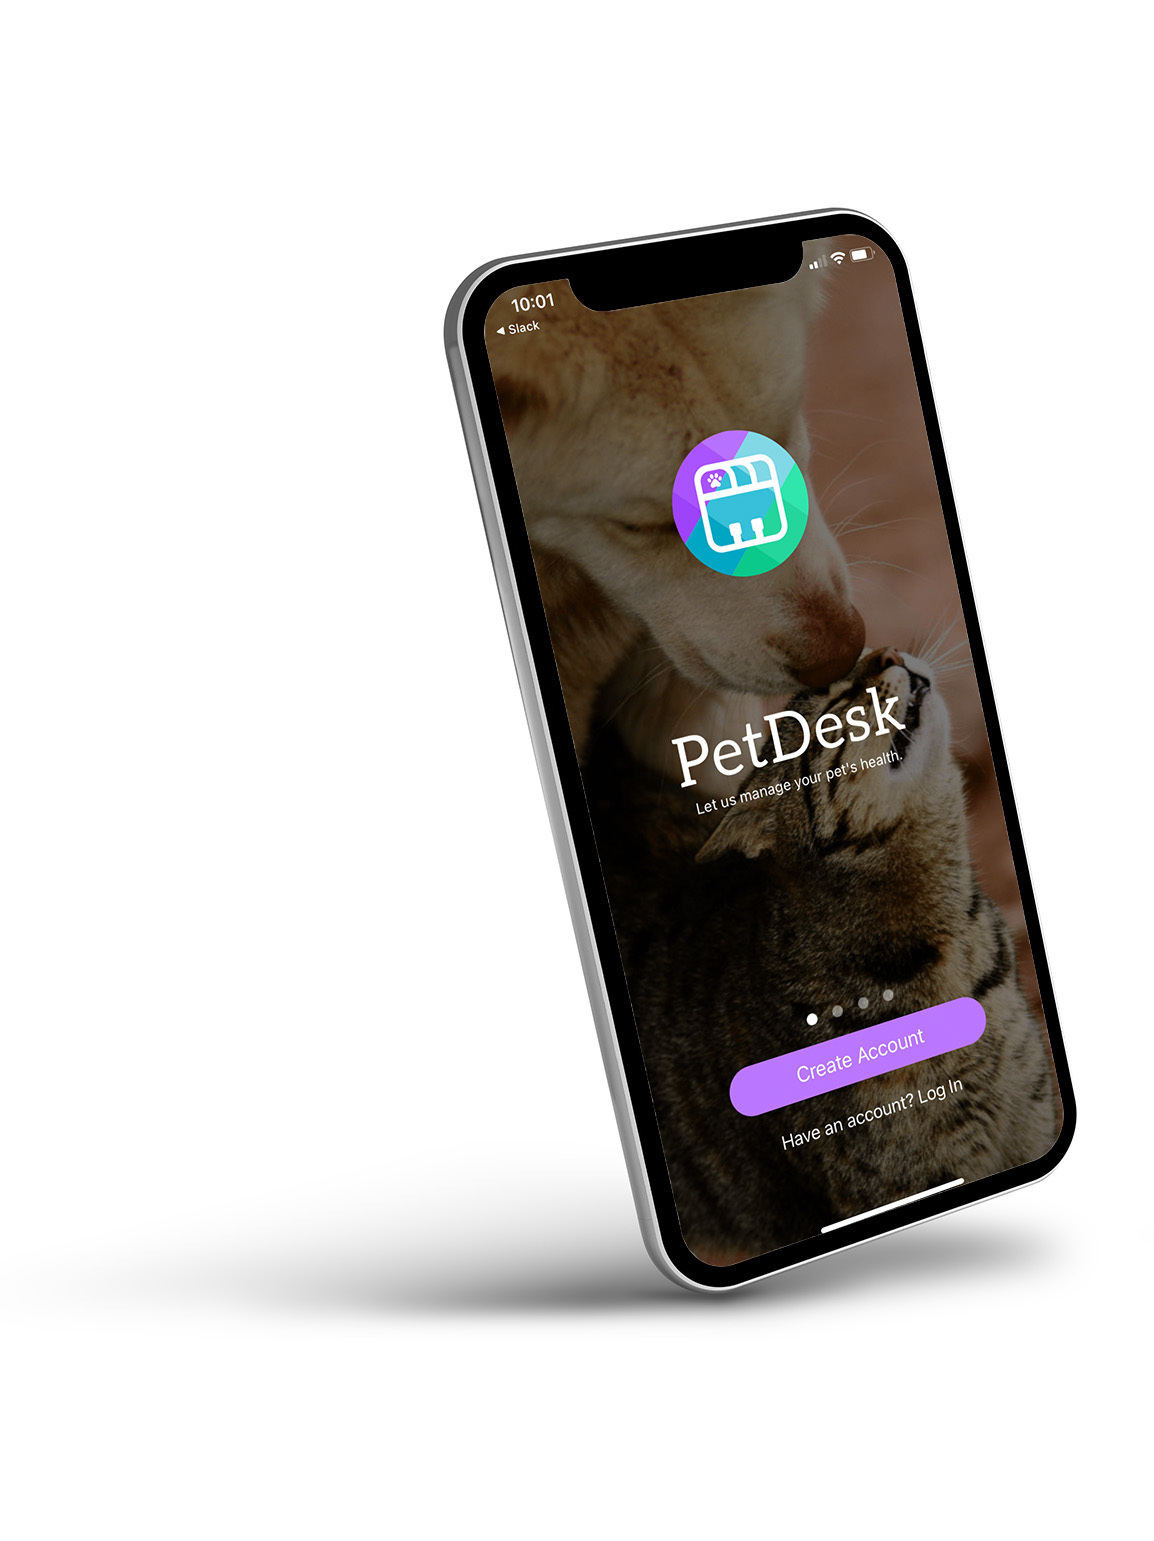 A mobile device with the PetDesk app on the home screen.